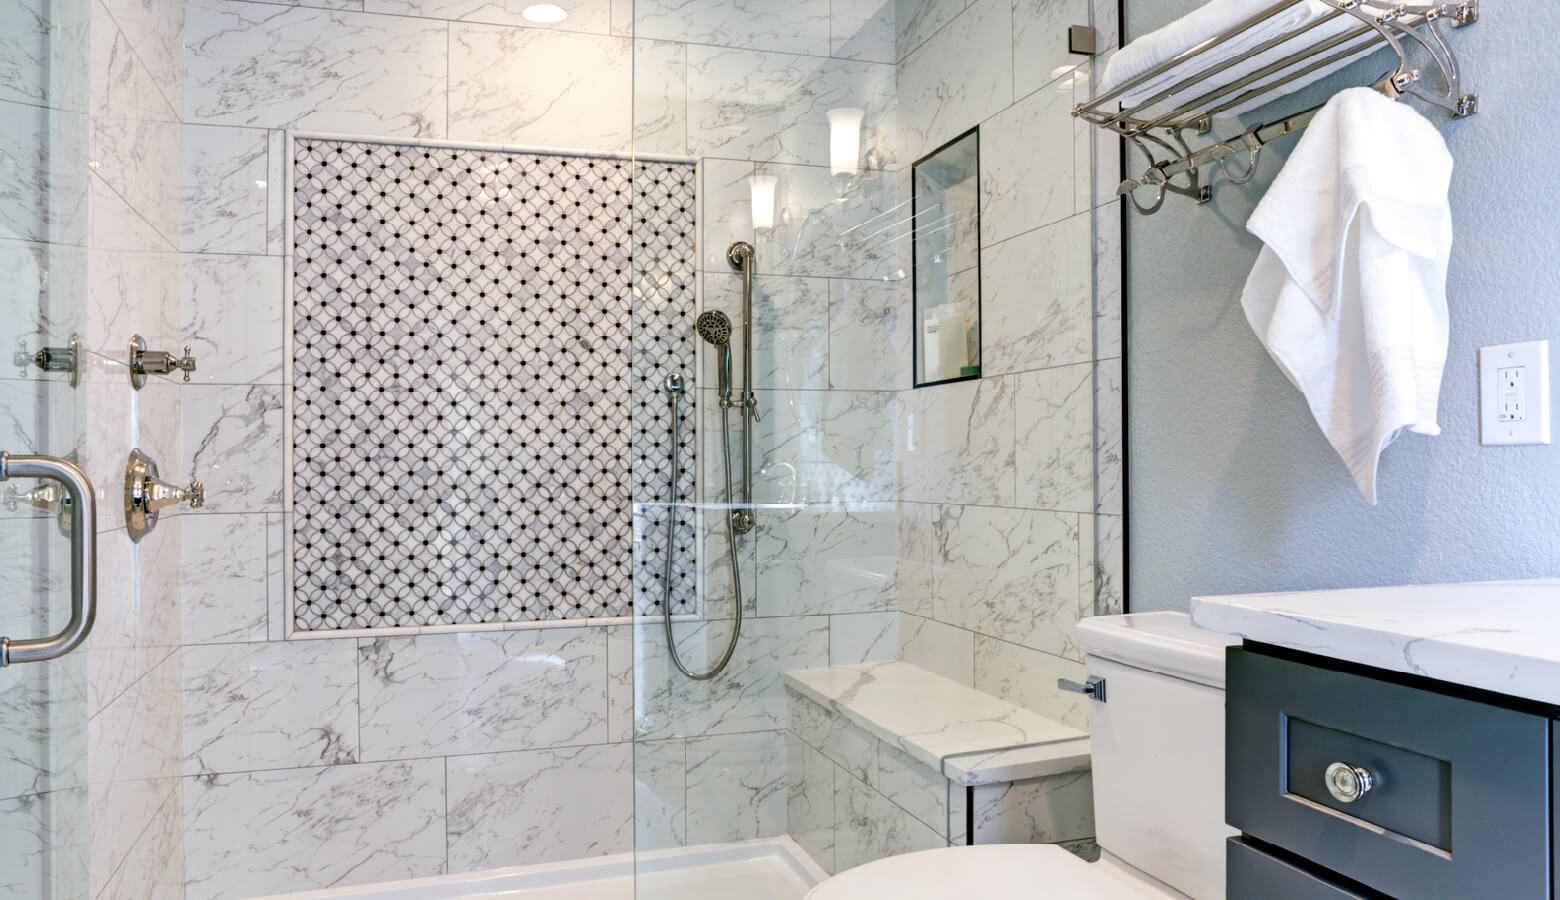 45 Shower Tile Ideas for Every Shower Type